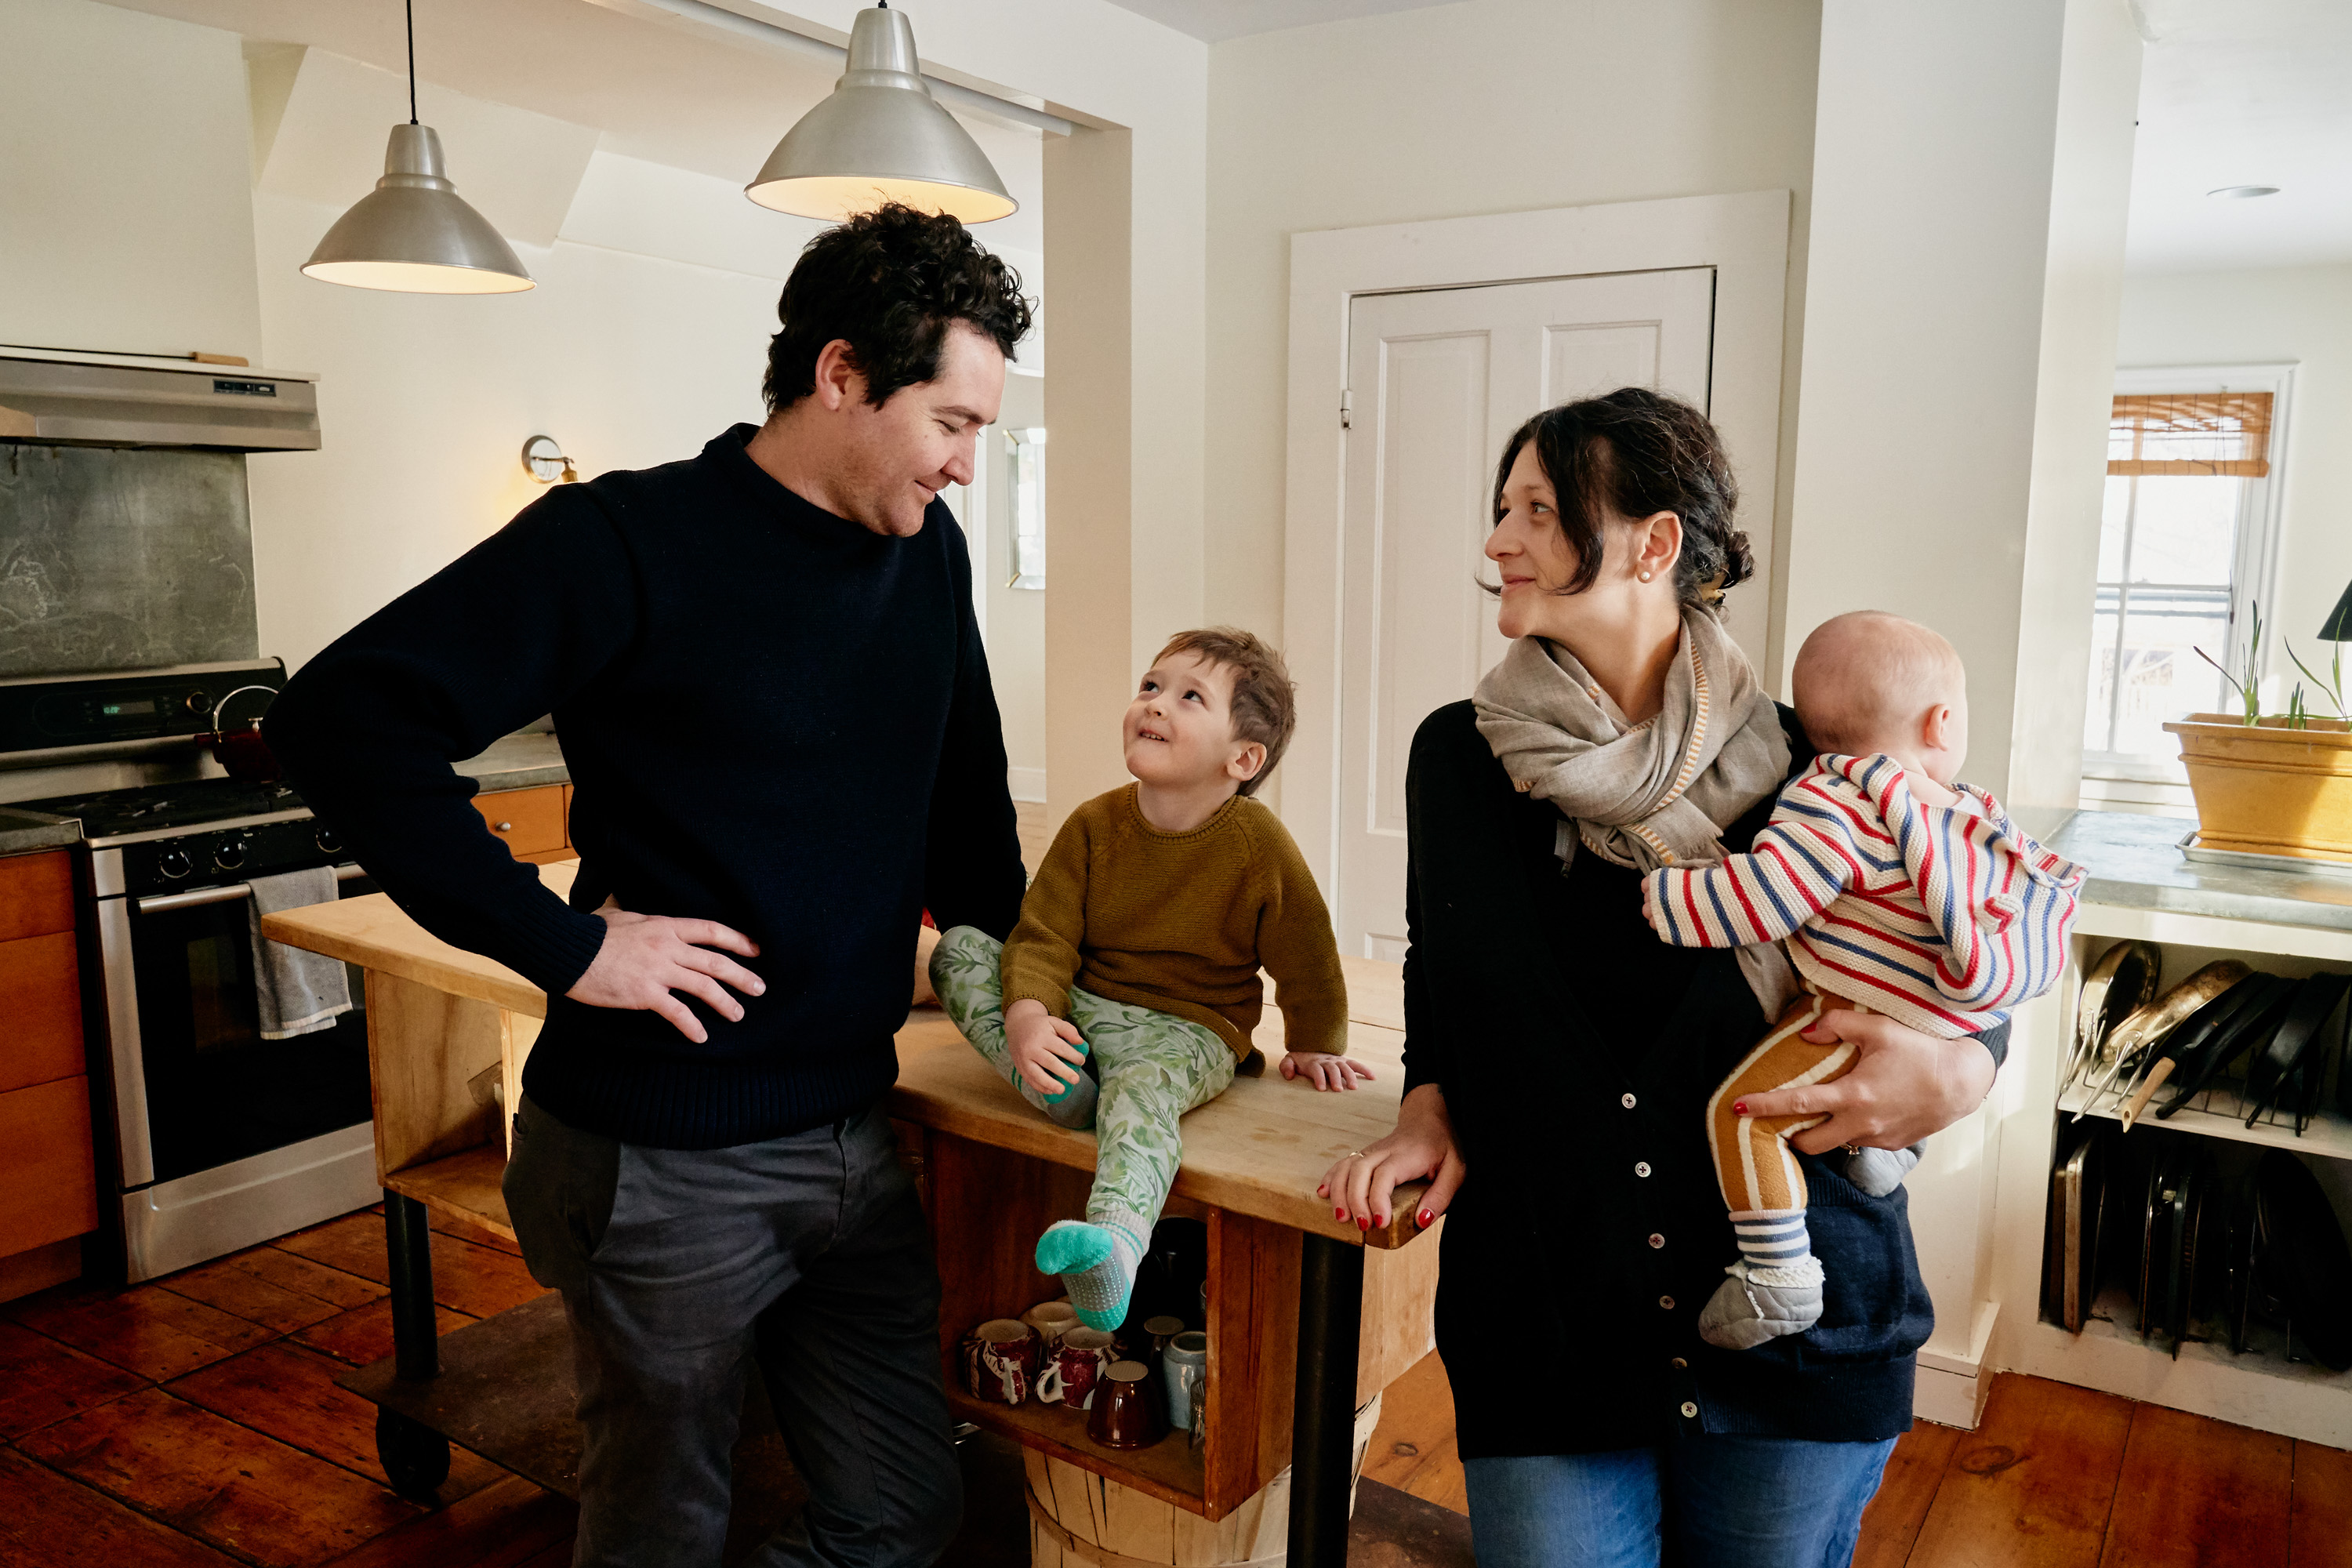 Young family of four, including a dad, mother, a young son and baby are gathered in their Airbnb listing kitchen.